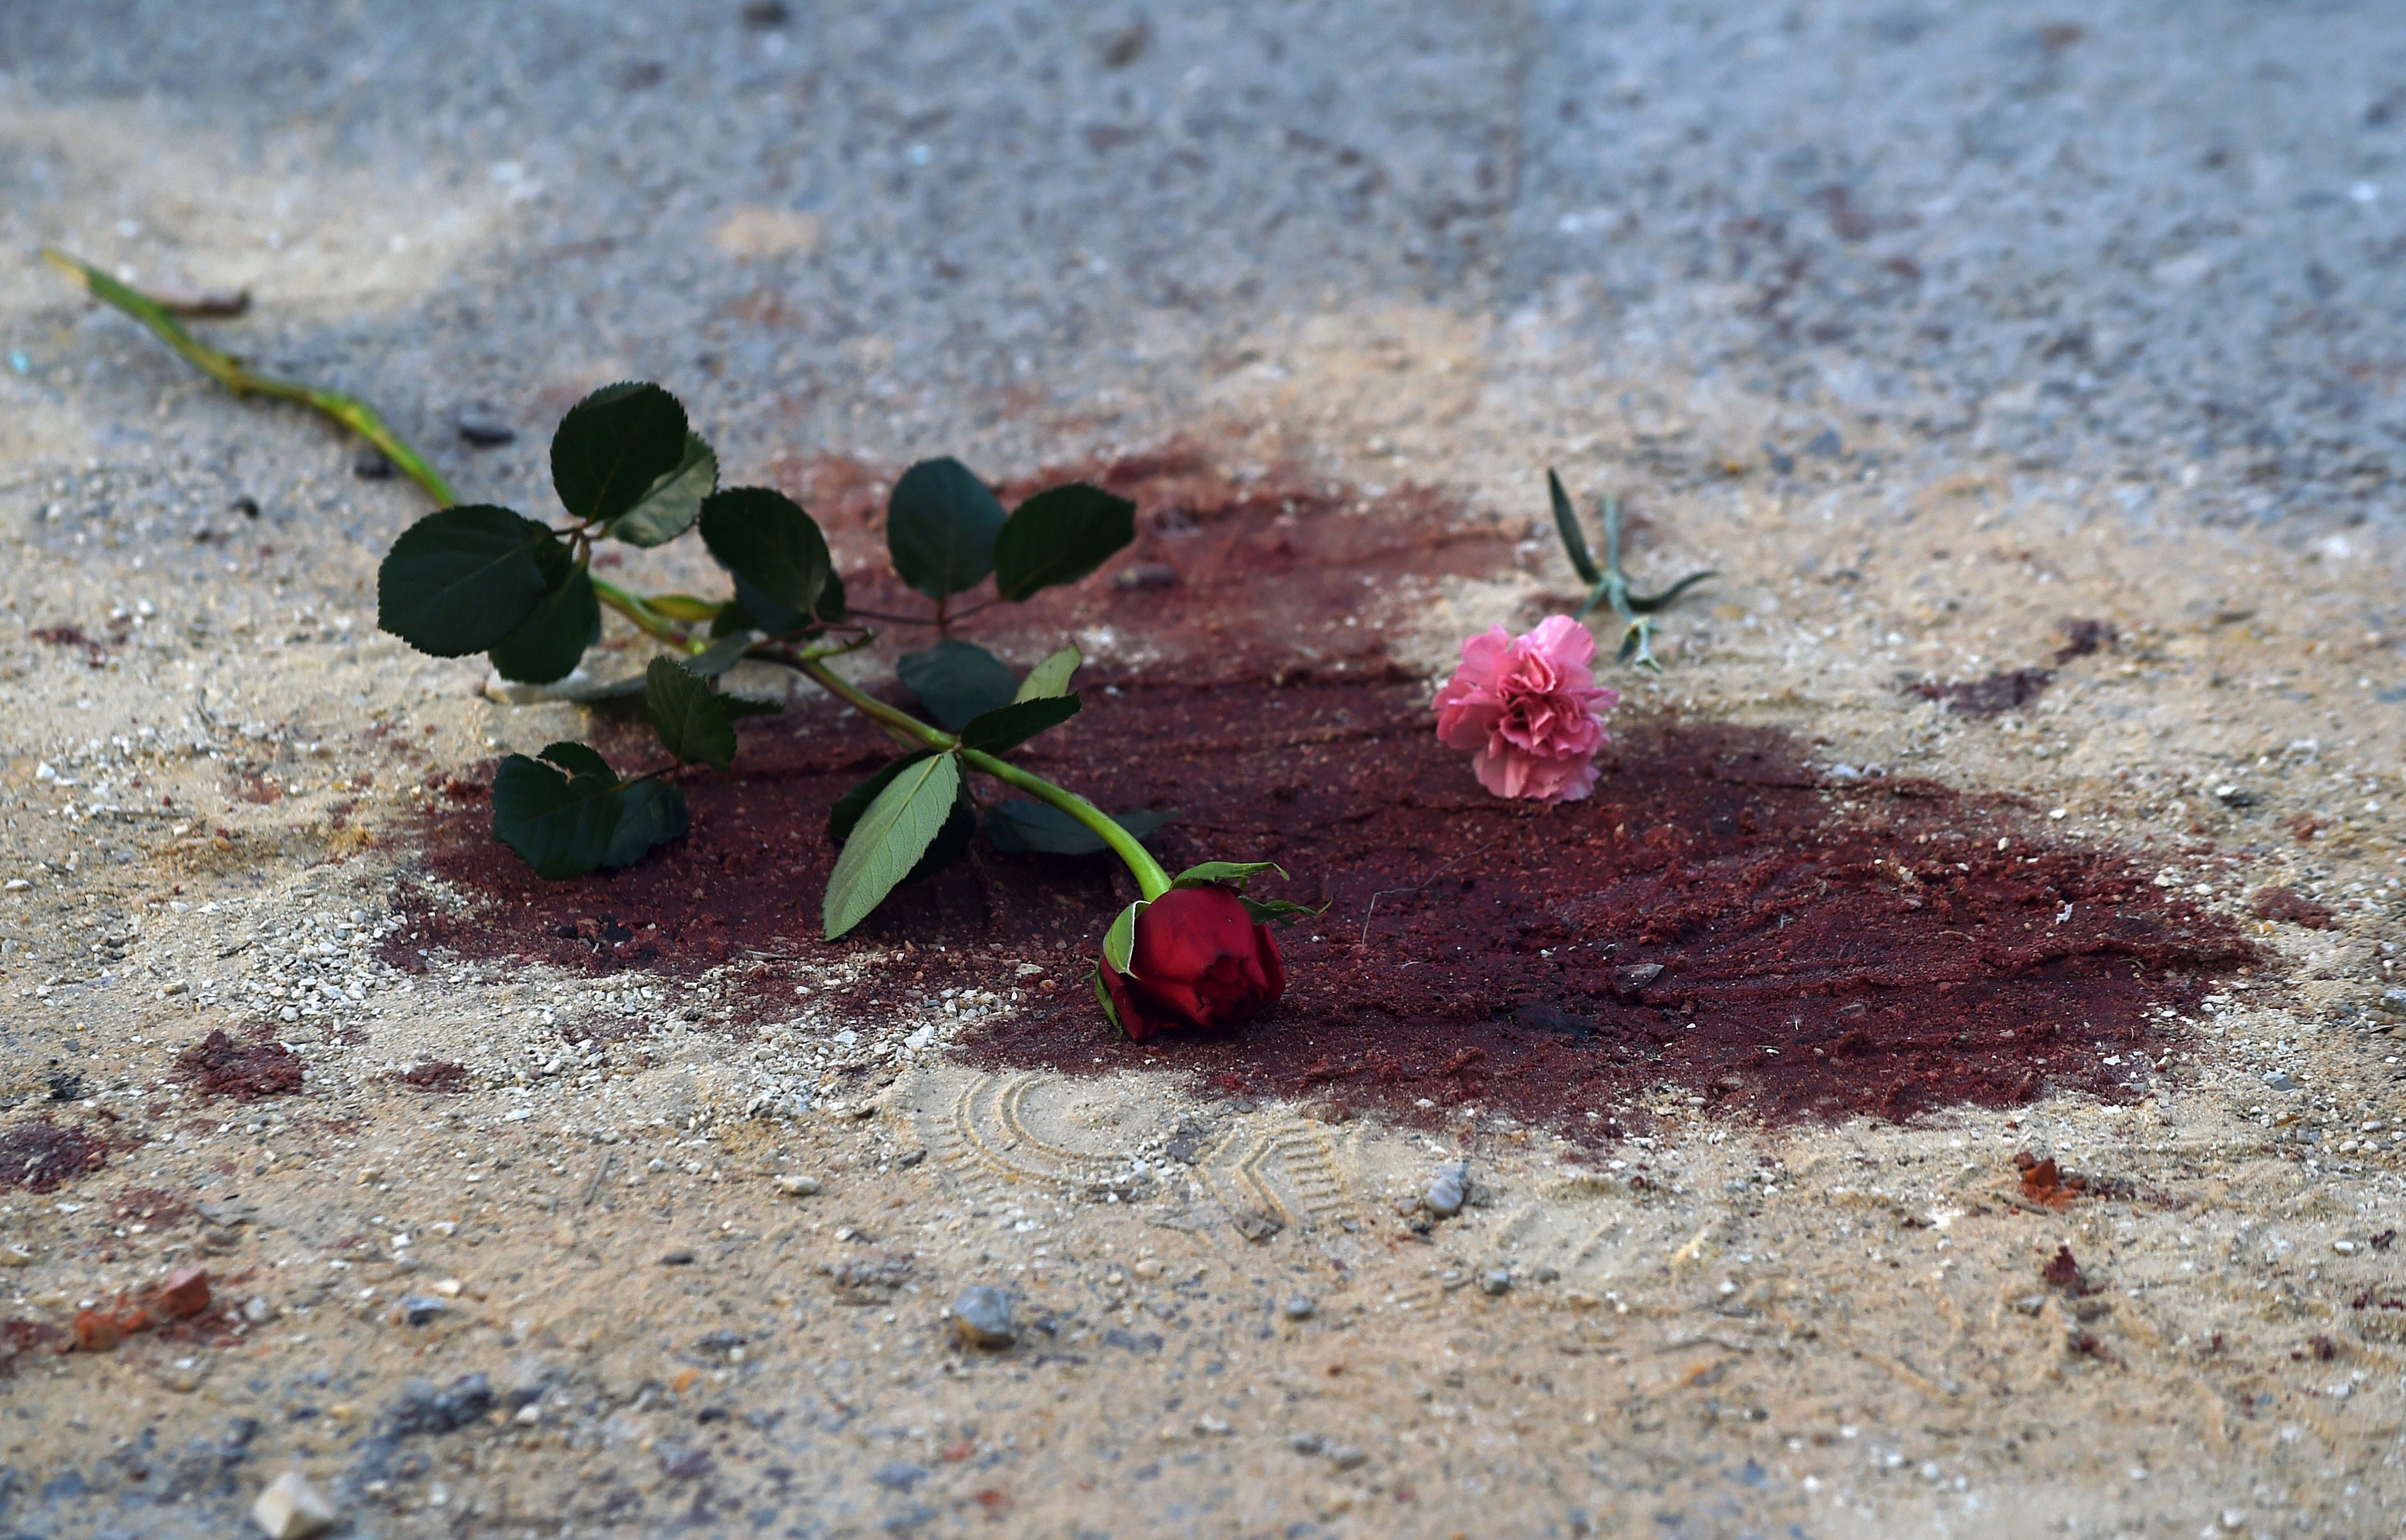 Roses are seen on bloodstains in front of the National Bardo Museum in Tunis on March 19, 2015 during a demonstration in solidarity with the victims of an attack on the museum the previous day killing 21 people. Tunisia has vowed to wage &quot;a merciless war against terrorism&quot; after the carnage at its national museum but it has struggled to draw up a strategy to counter the jihadist threat. AFP PHOTO /FADEL SENNA        (Photo credit should read FADEL SENNA/AFP/Getty Images)